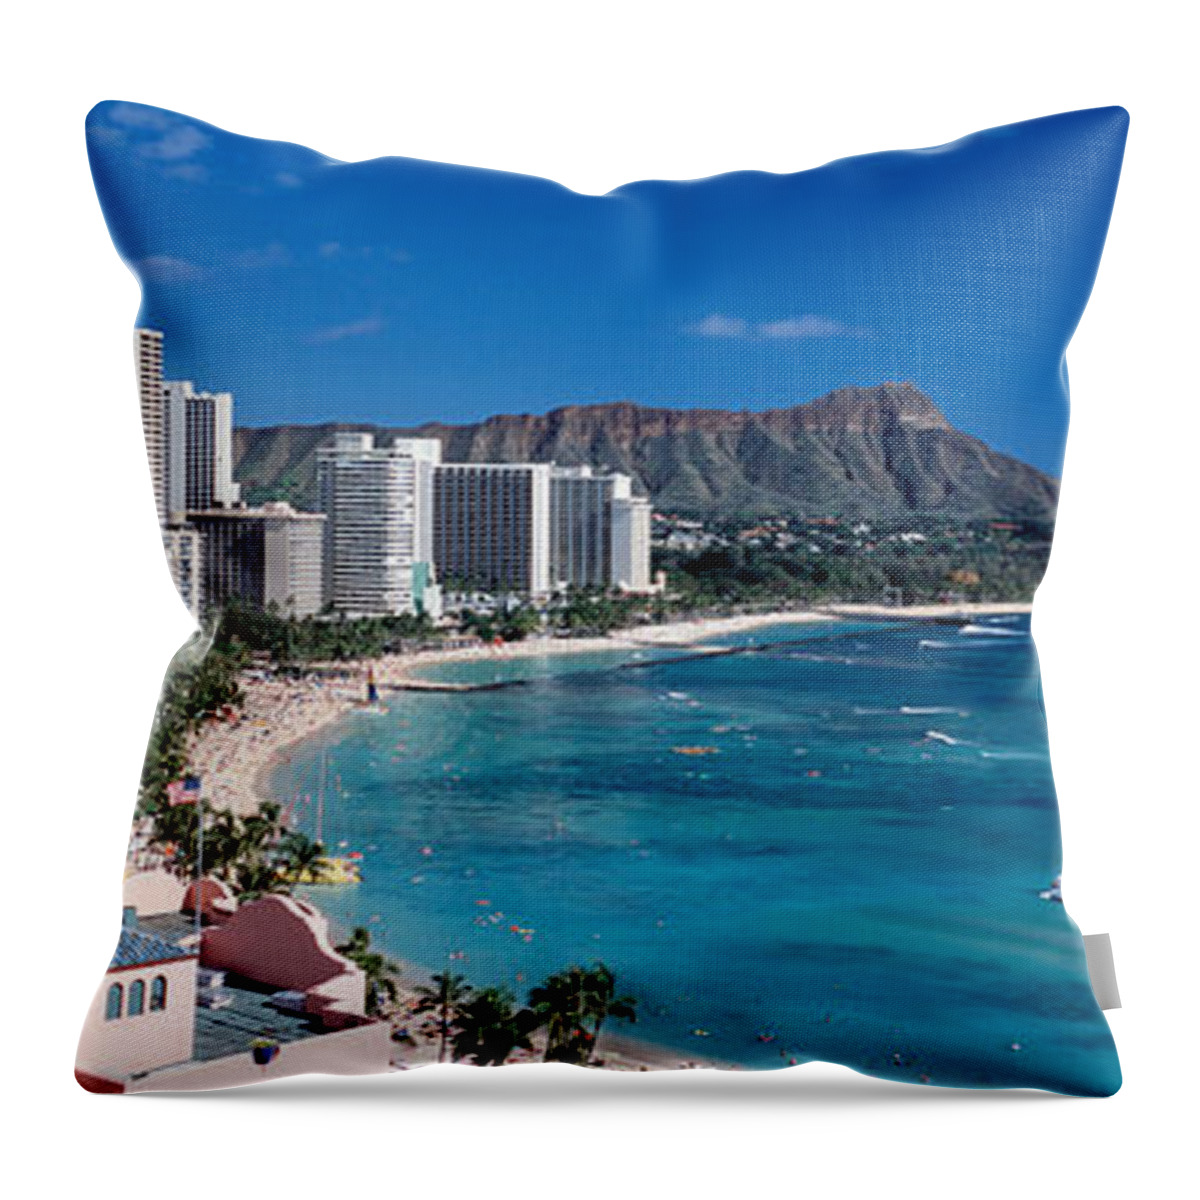 Photography Throw Pillow featuring the photograph Buildings At The Waterfront, Waikiki #2 by Panoramic Images